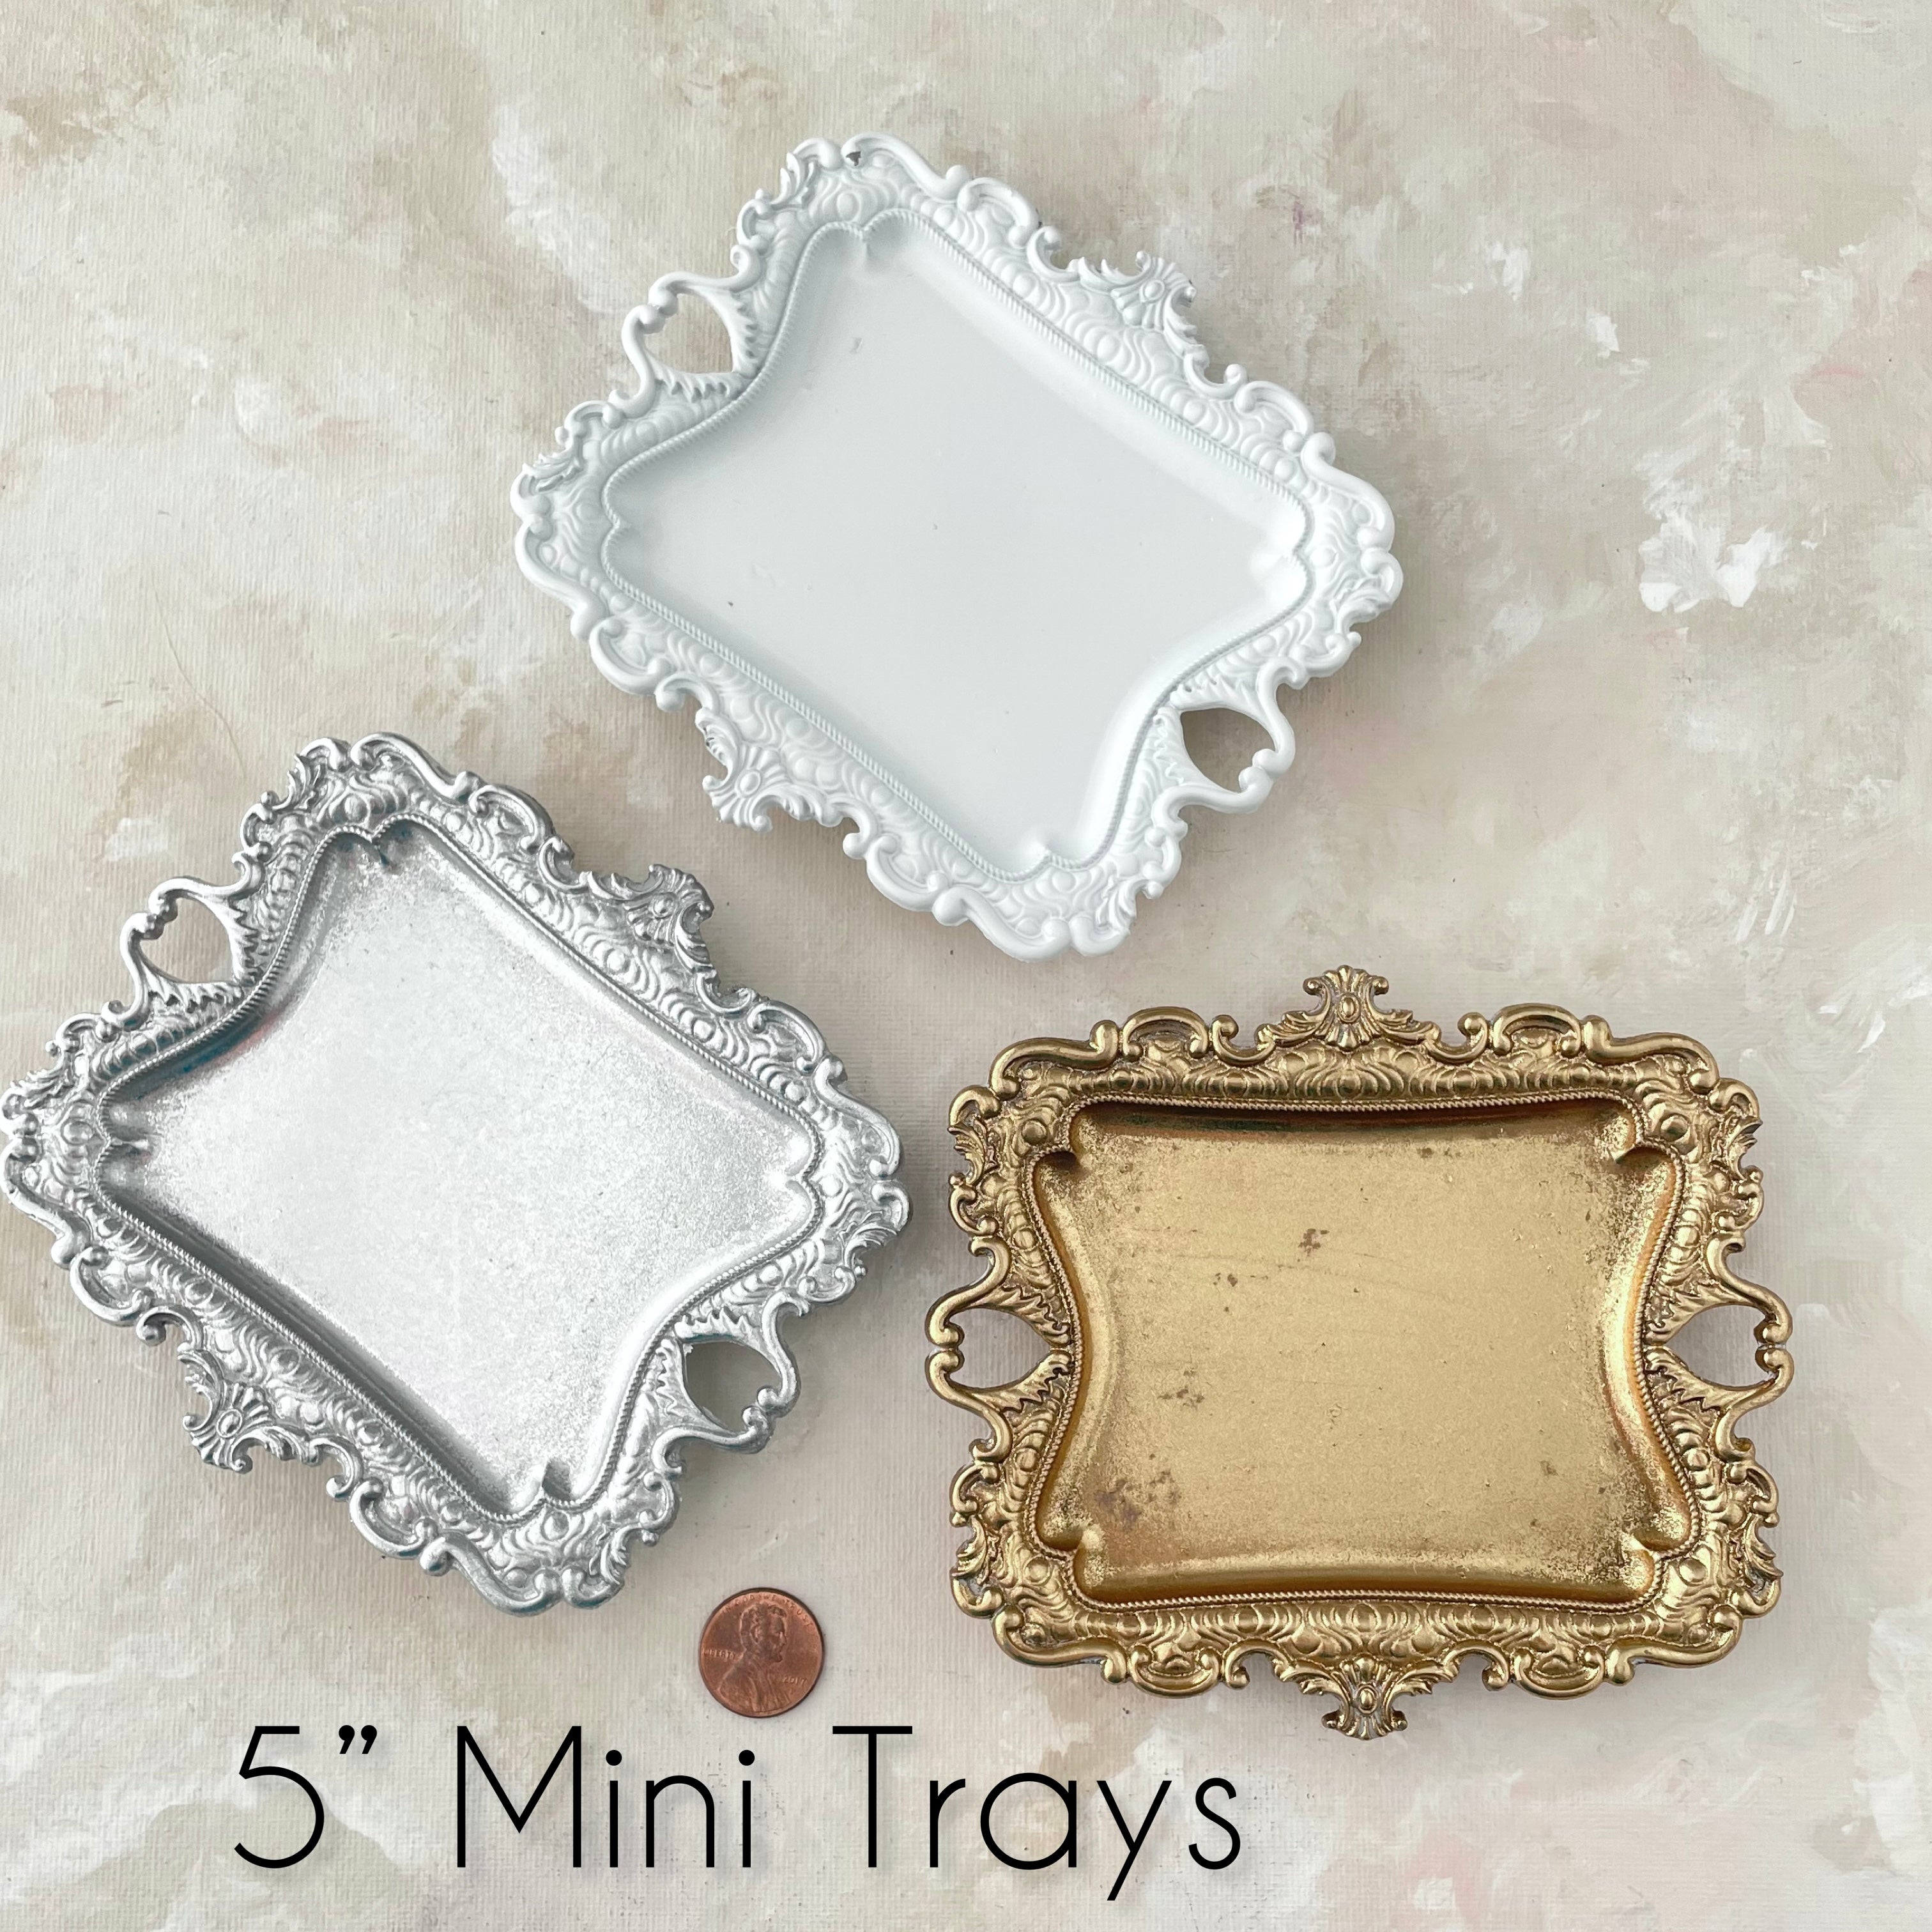 Vintage gold tray, silver tray, and white tray, penny beside for size reference - Wedding Flat Lay Props from Champagne & GRIT